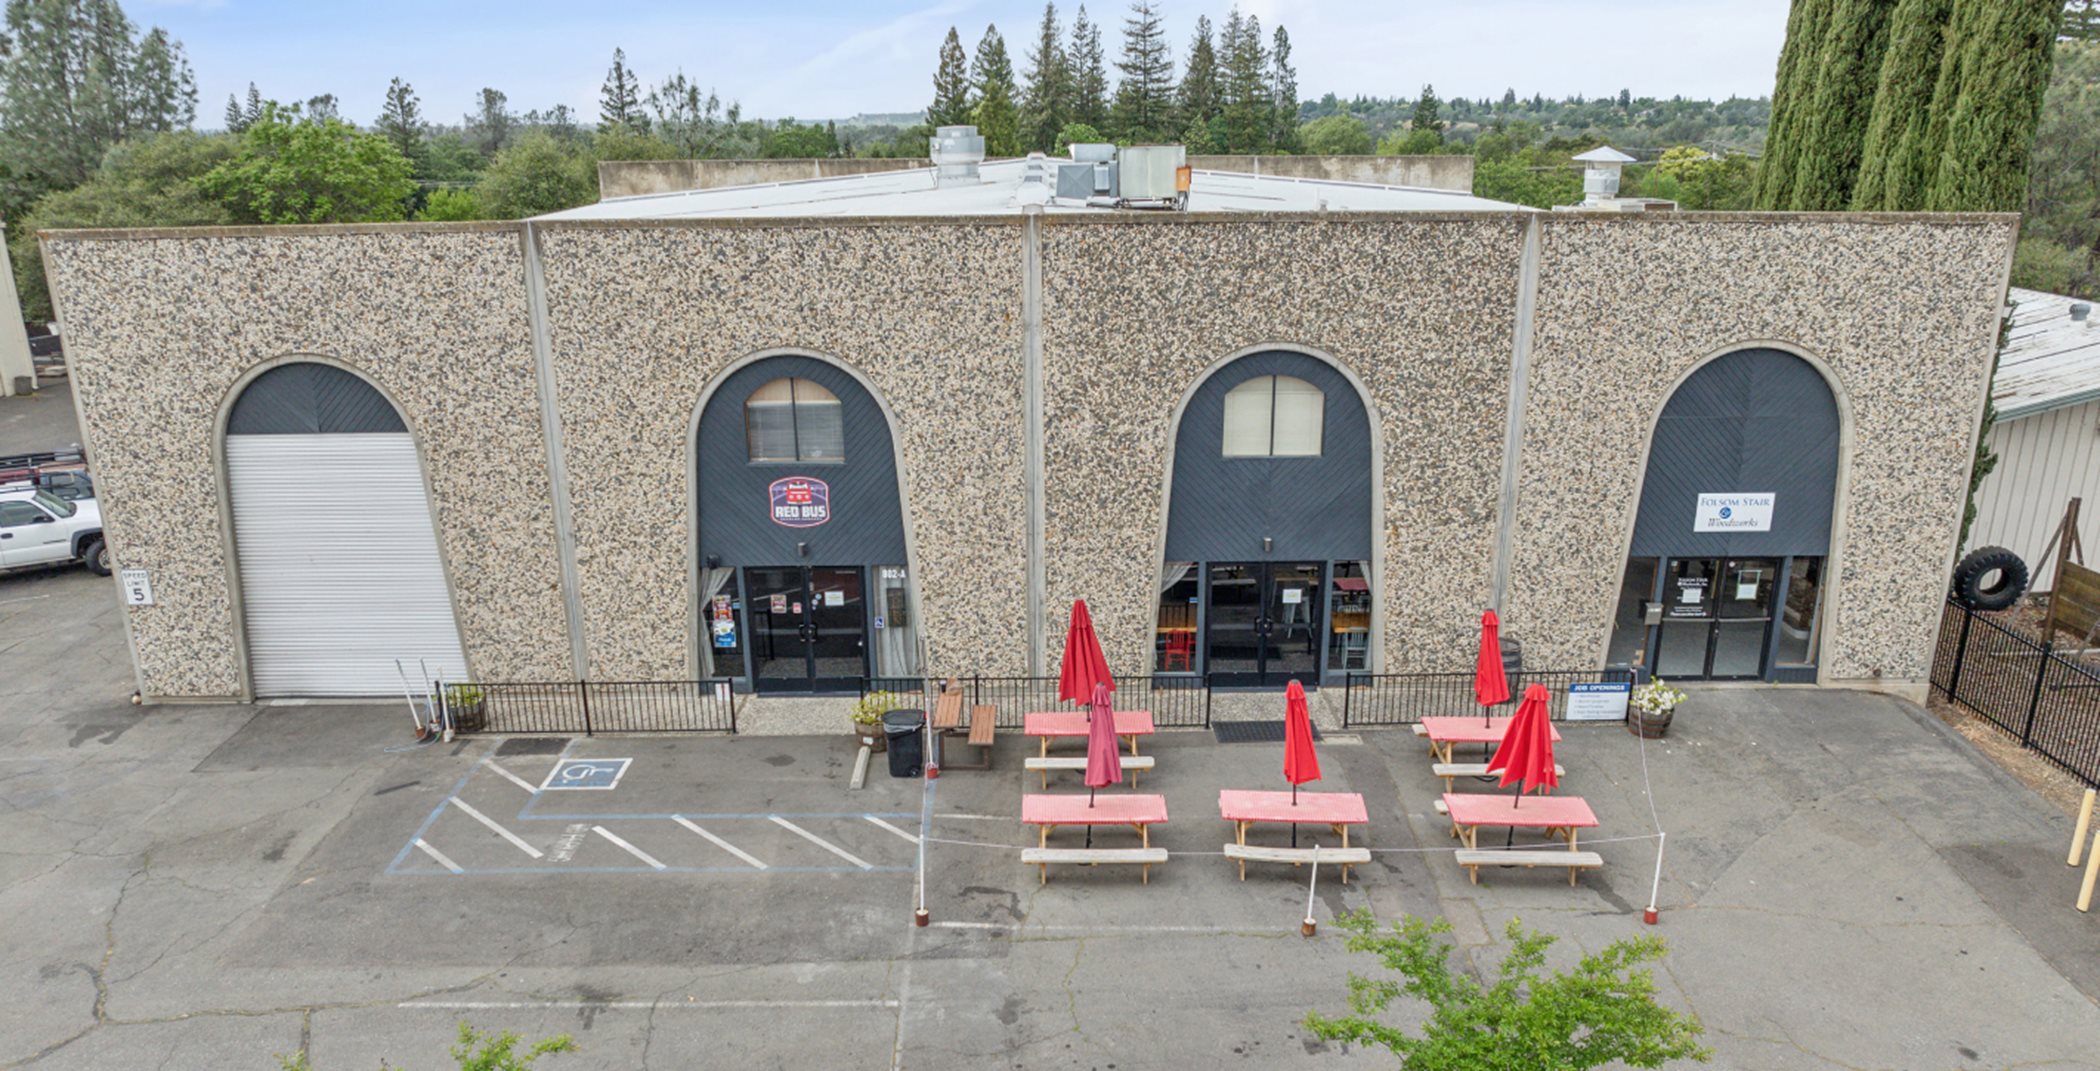 Red Bus Brewing Company aerial view